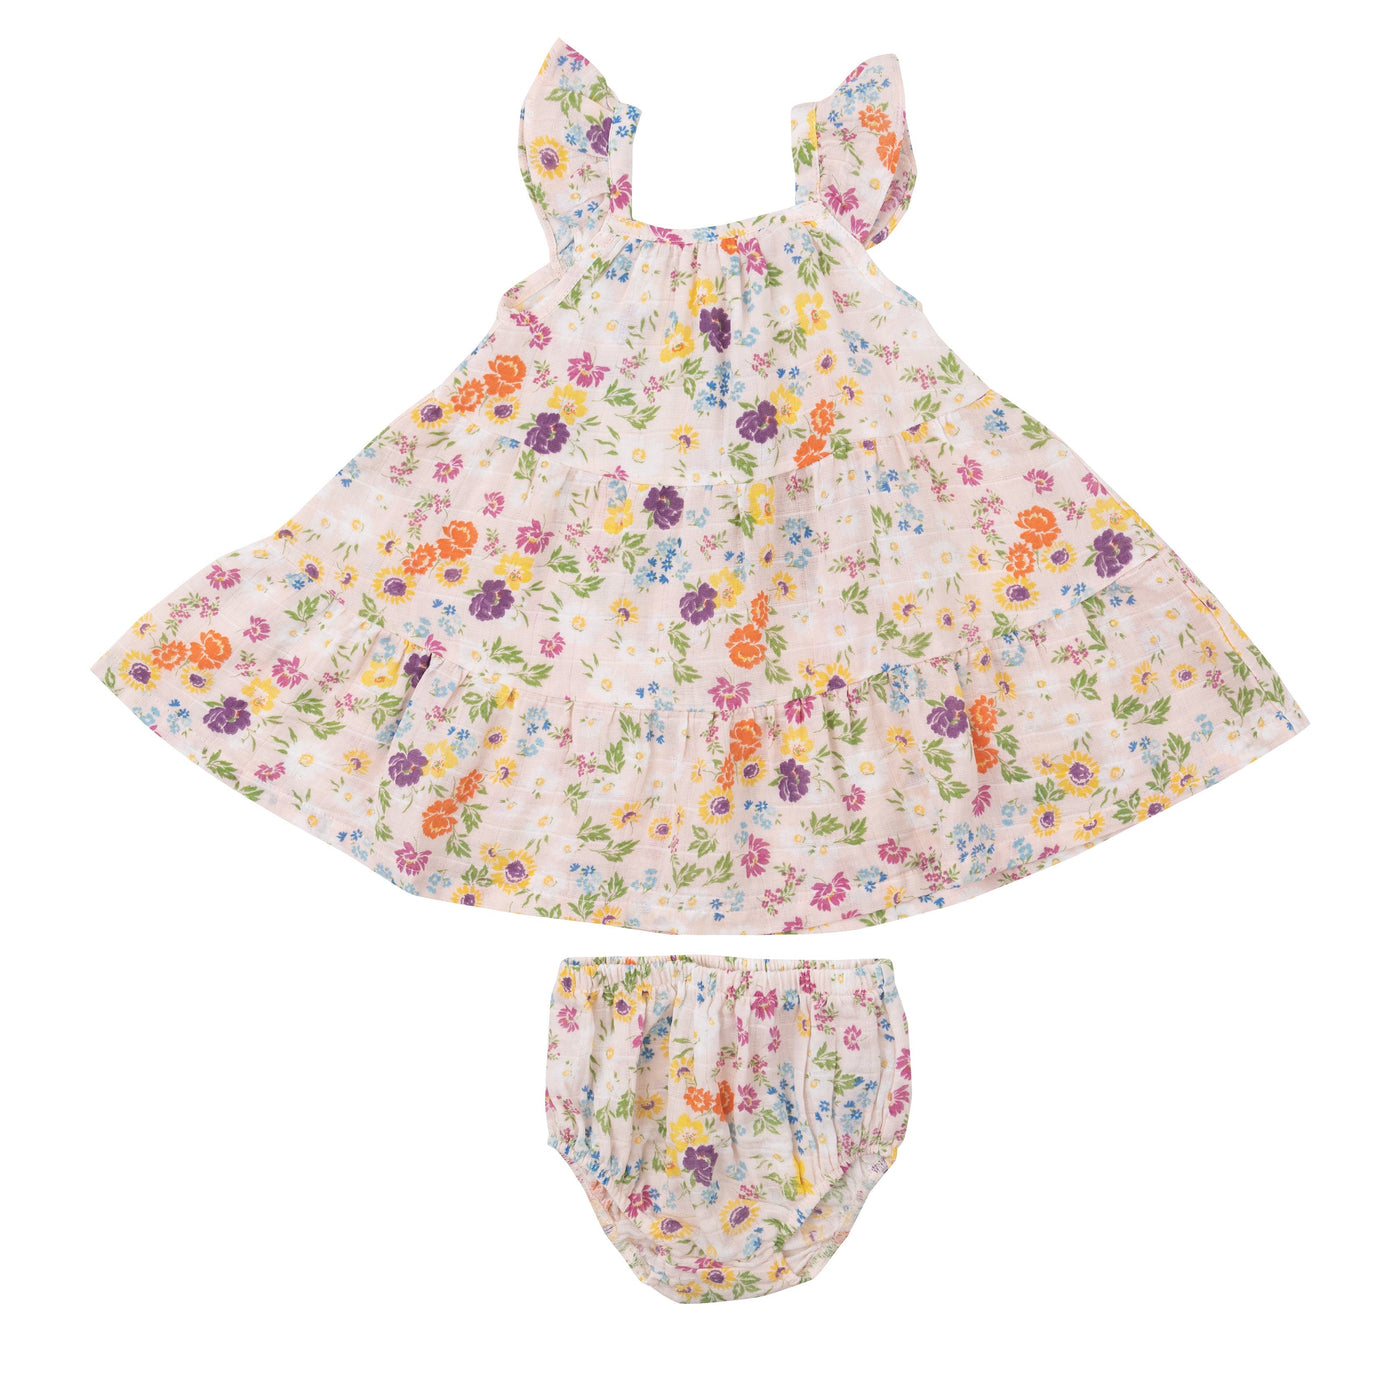 Twirly Sundress & Diaper Cover - Cheery Mix Floral - Angel Dear